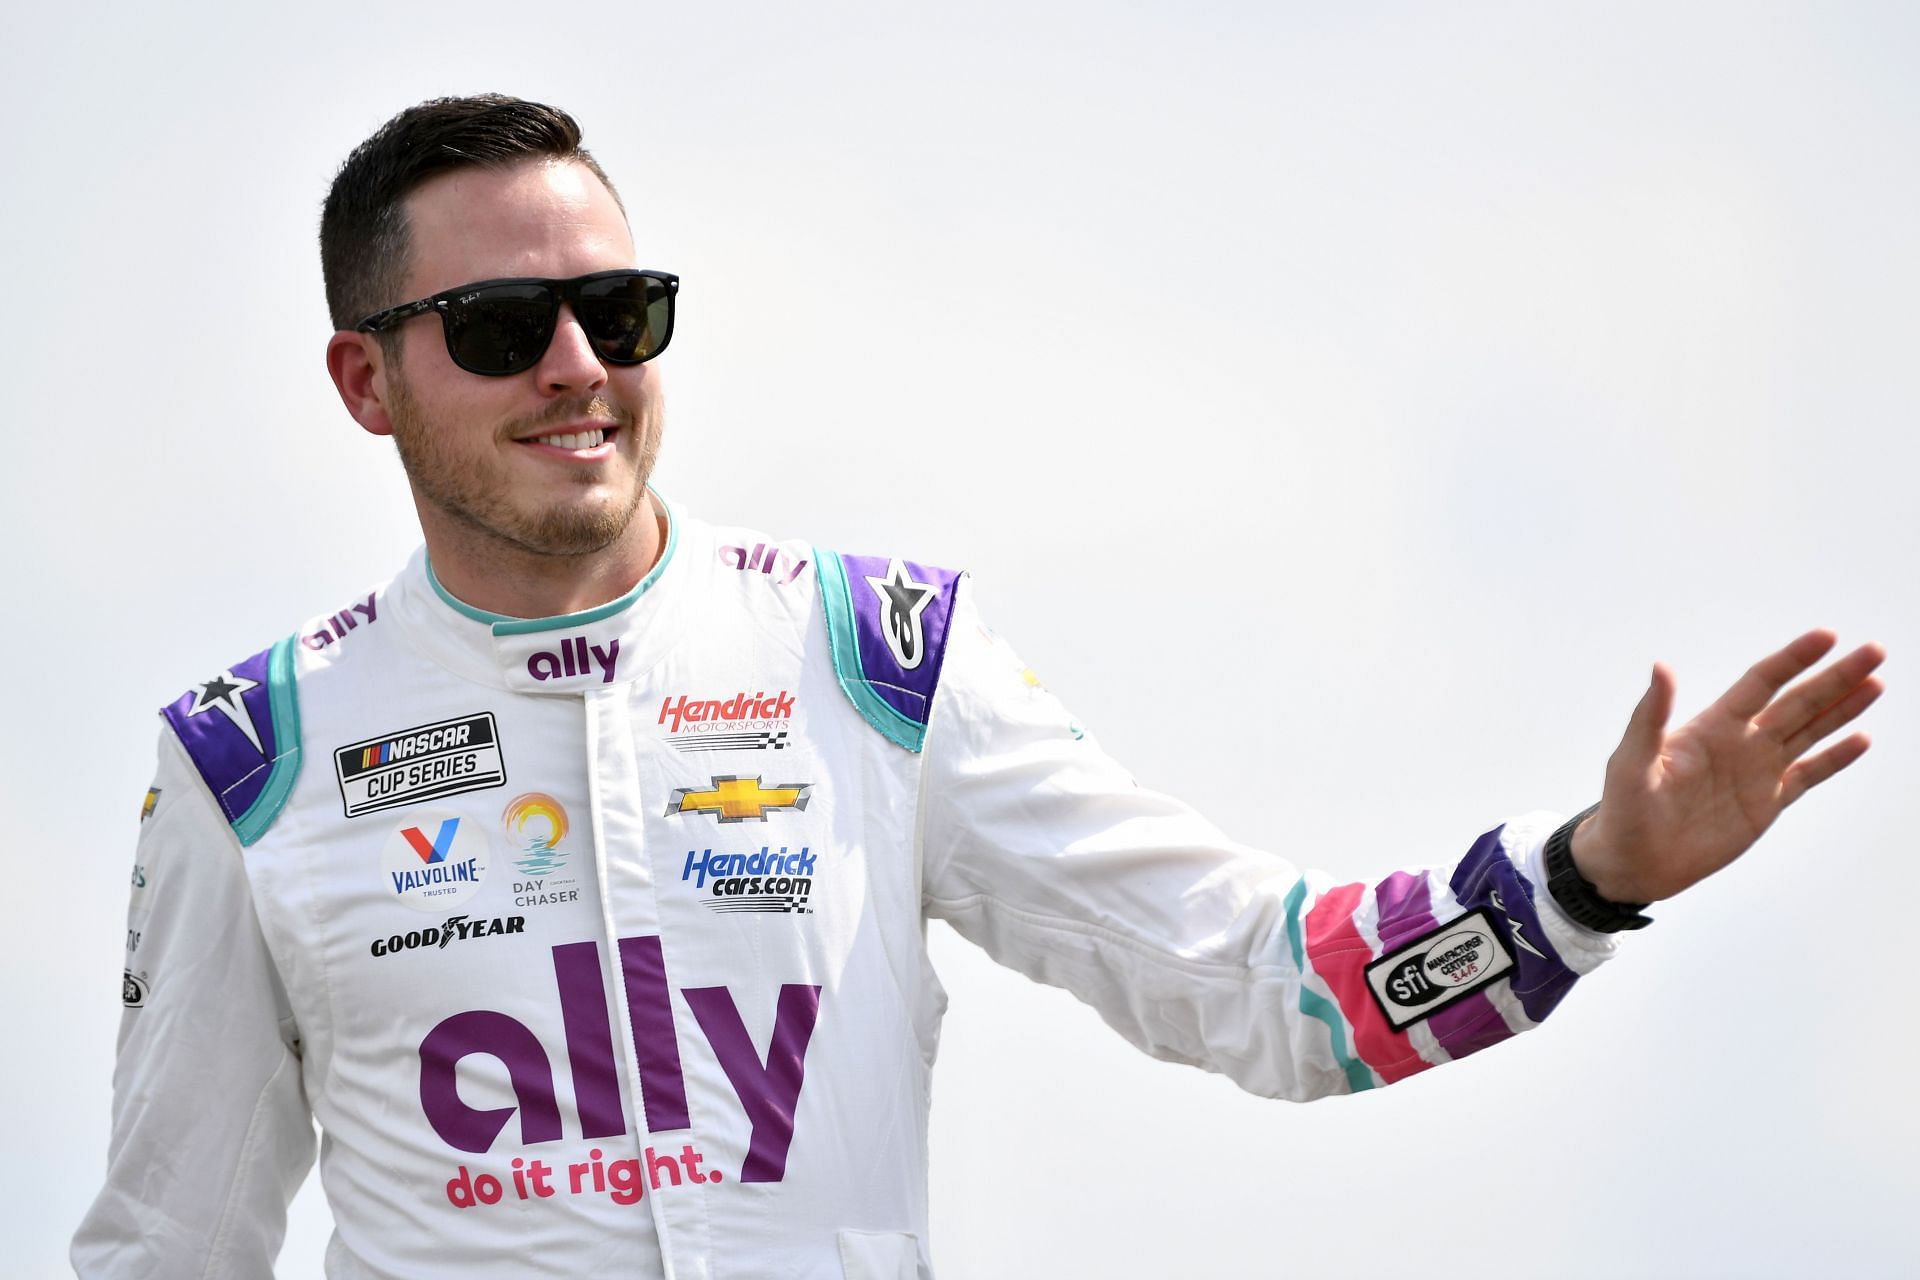 Alex Bowman waves to fans onstage during driver intros before the NASCAR Cup Series Ally 400 at Nashville Superspeedway